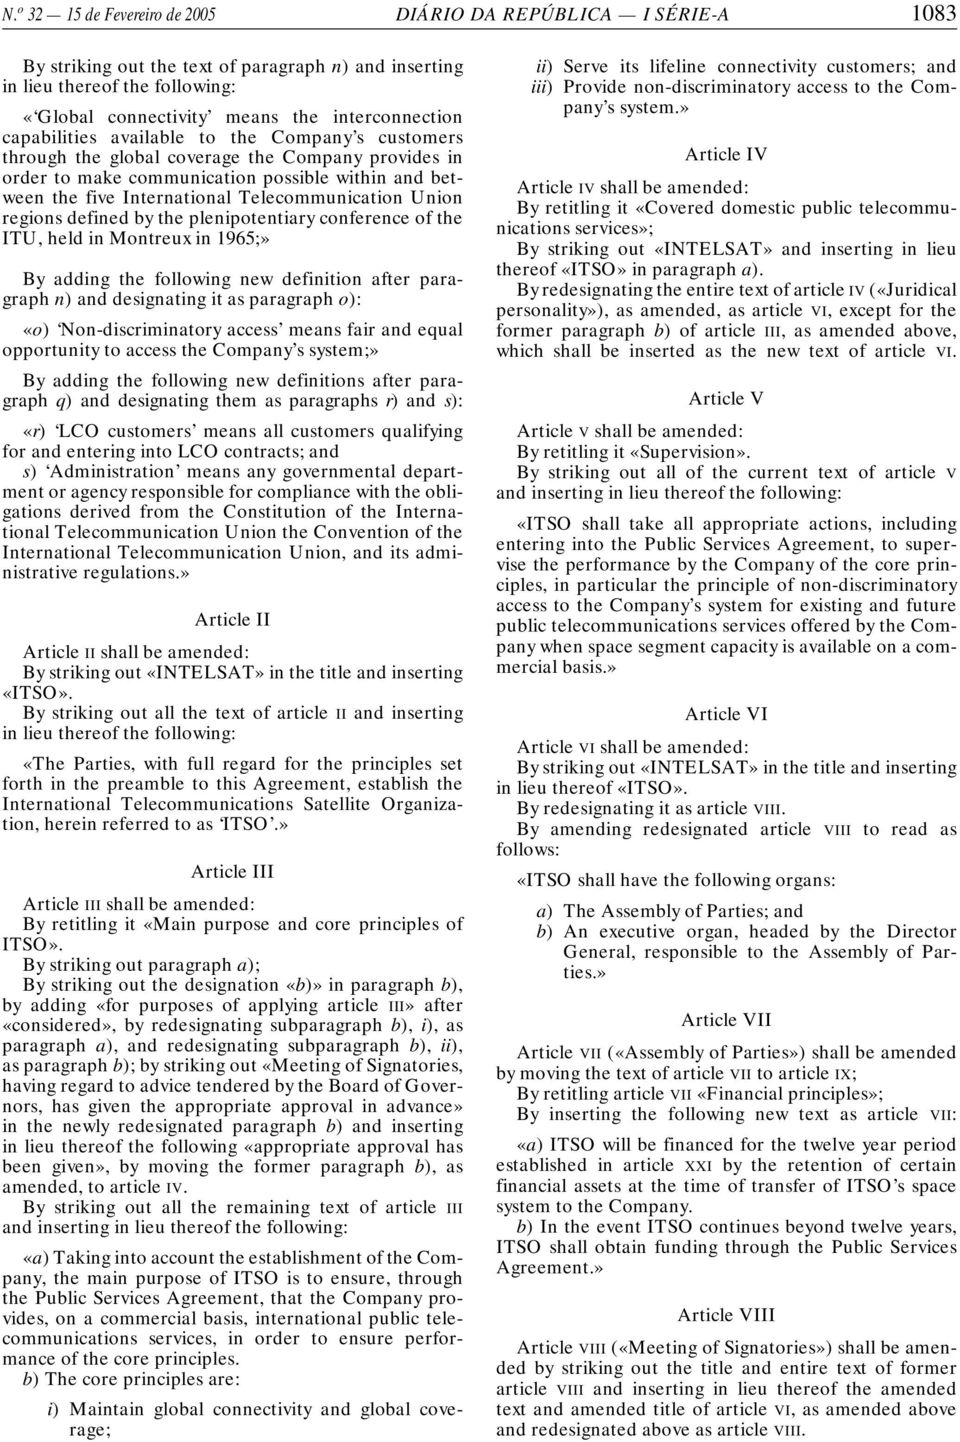 Union regions defined by the plenipotentiary conference of the ITU, held in Montreux in 1965;» By adding the following new definition after paragraph n) and designating it as paragraph o): «o)